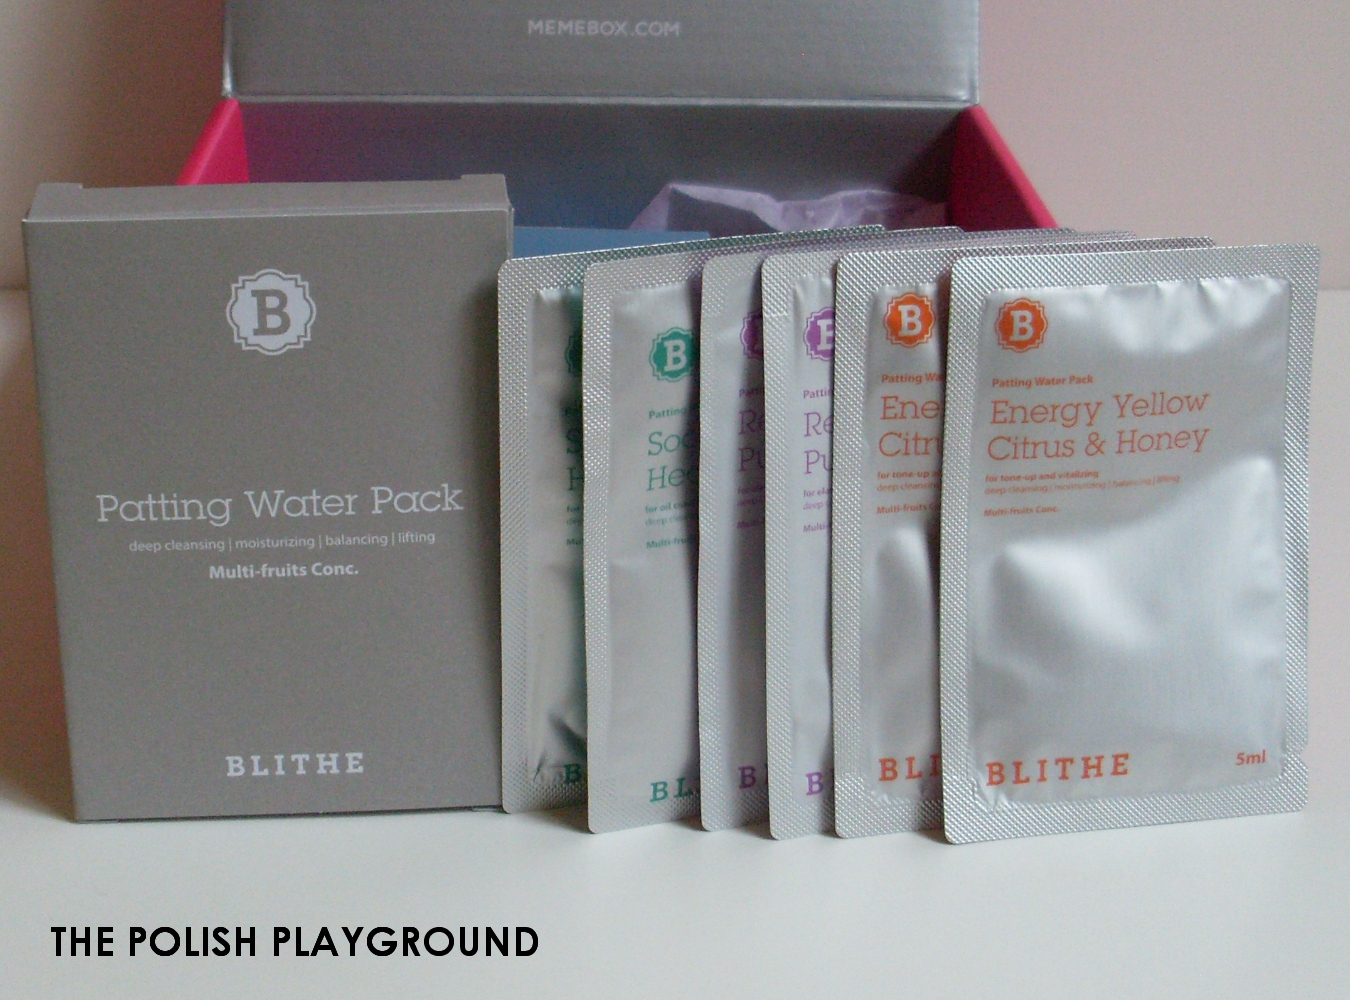 Memebox Special #81 The Next Best Thing in Skin Care Unboxing - Blithe Patting Water Pack (Includes Energy Yellow Citrus & Honey, Soothing & Healing Green Tea, and Rejuvenating Purple Berry)